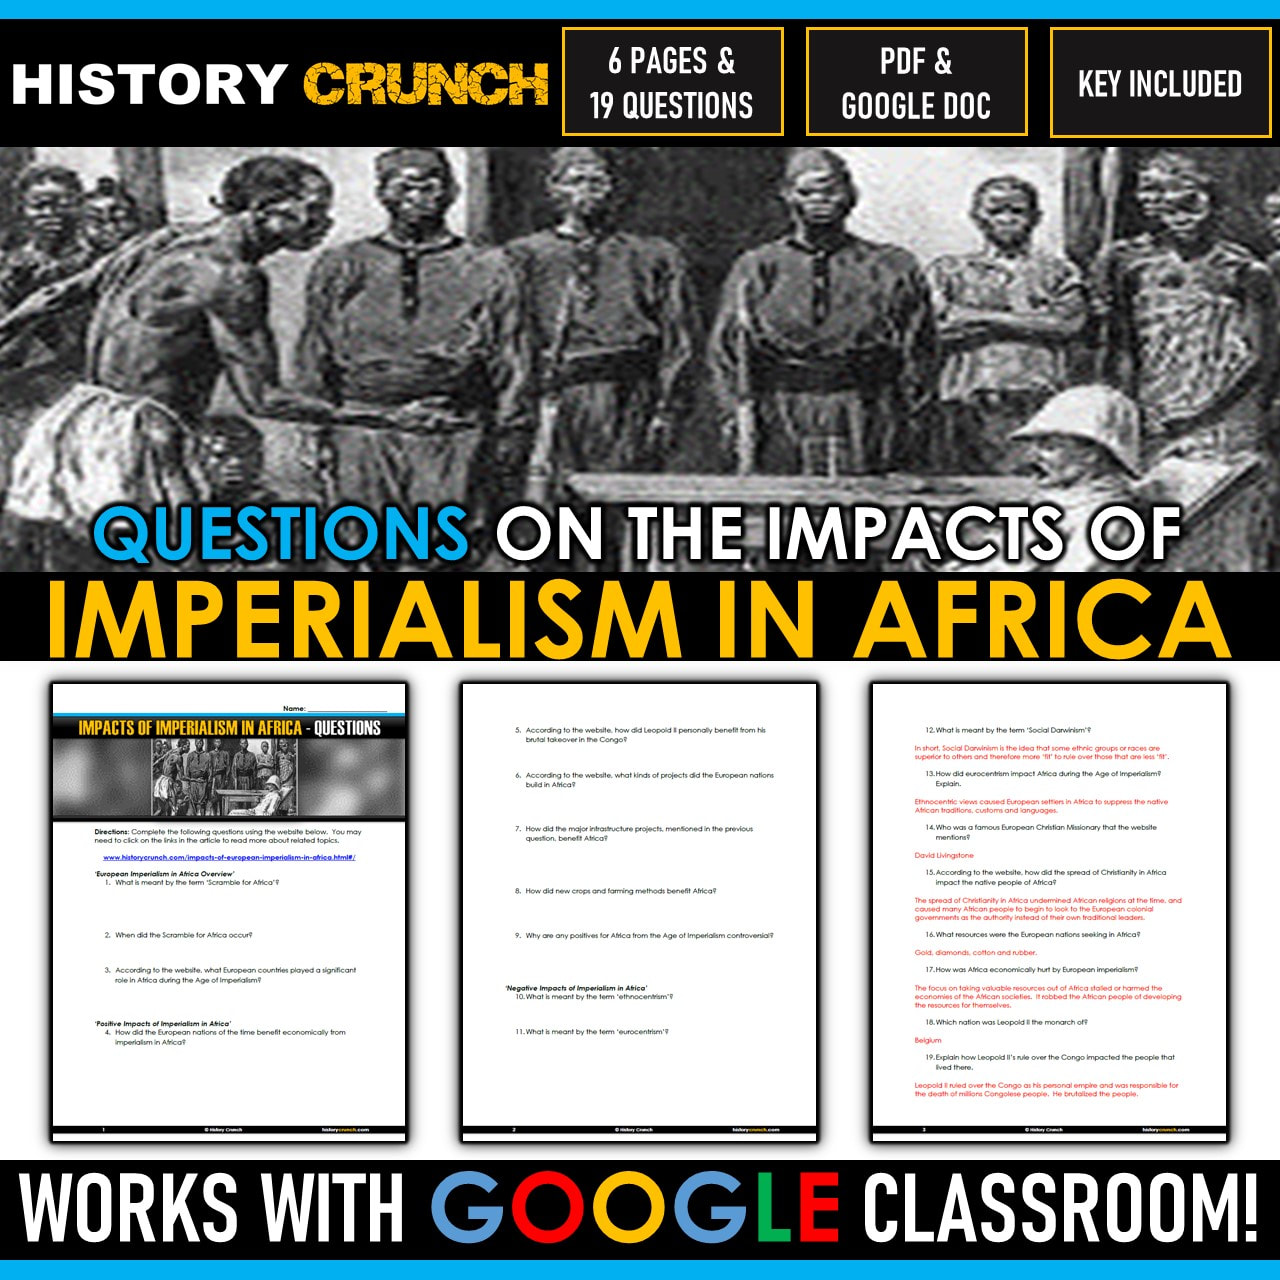 imperialism in africa mini q background essay questions 1